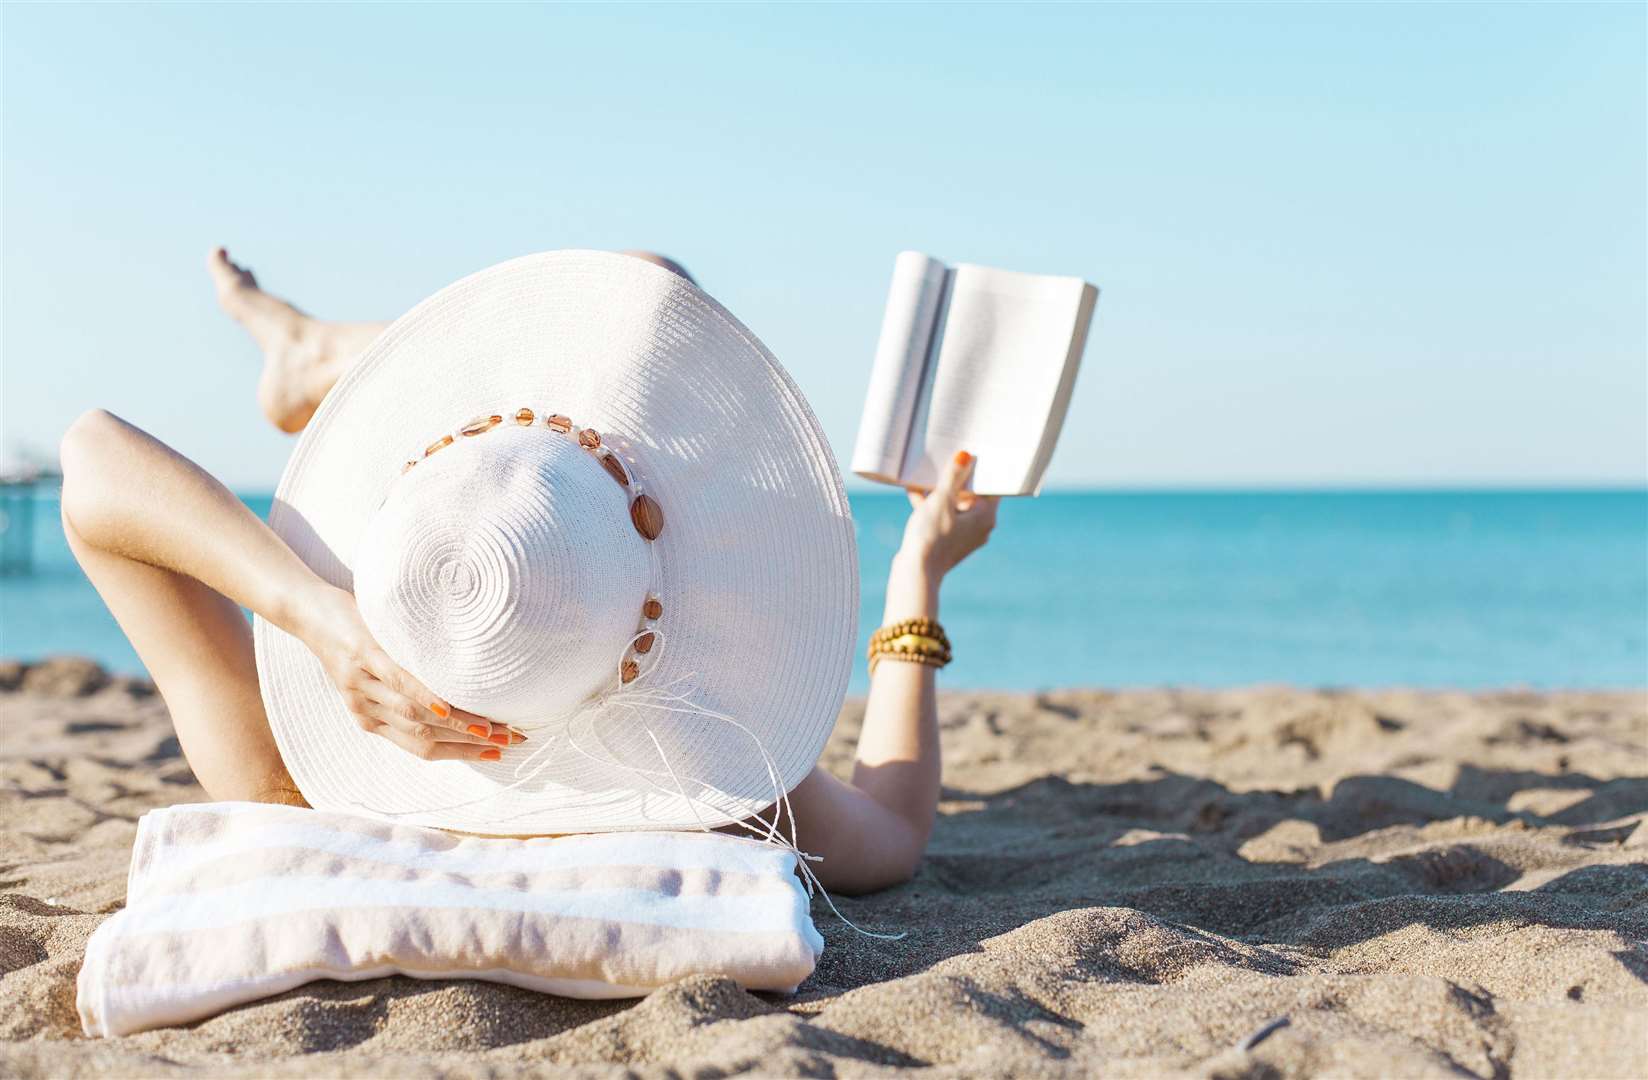 Want to take a book to read on holiday? Here's some hot some reading: